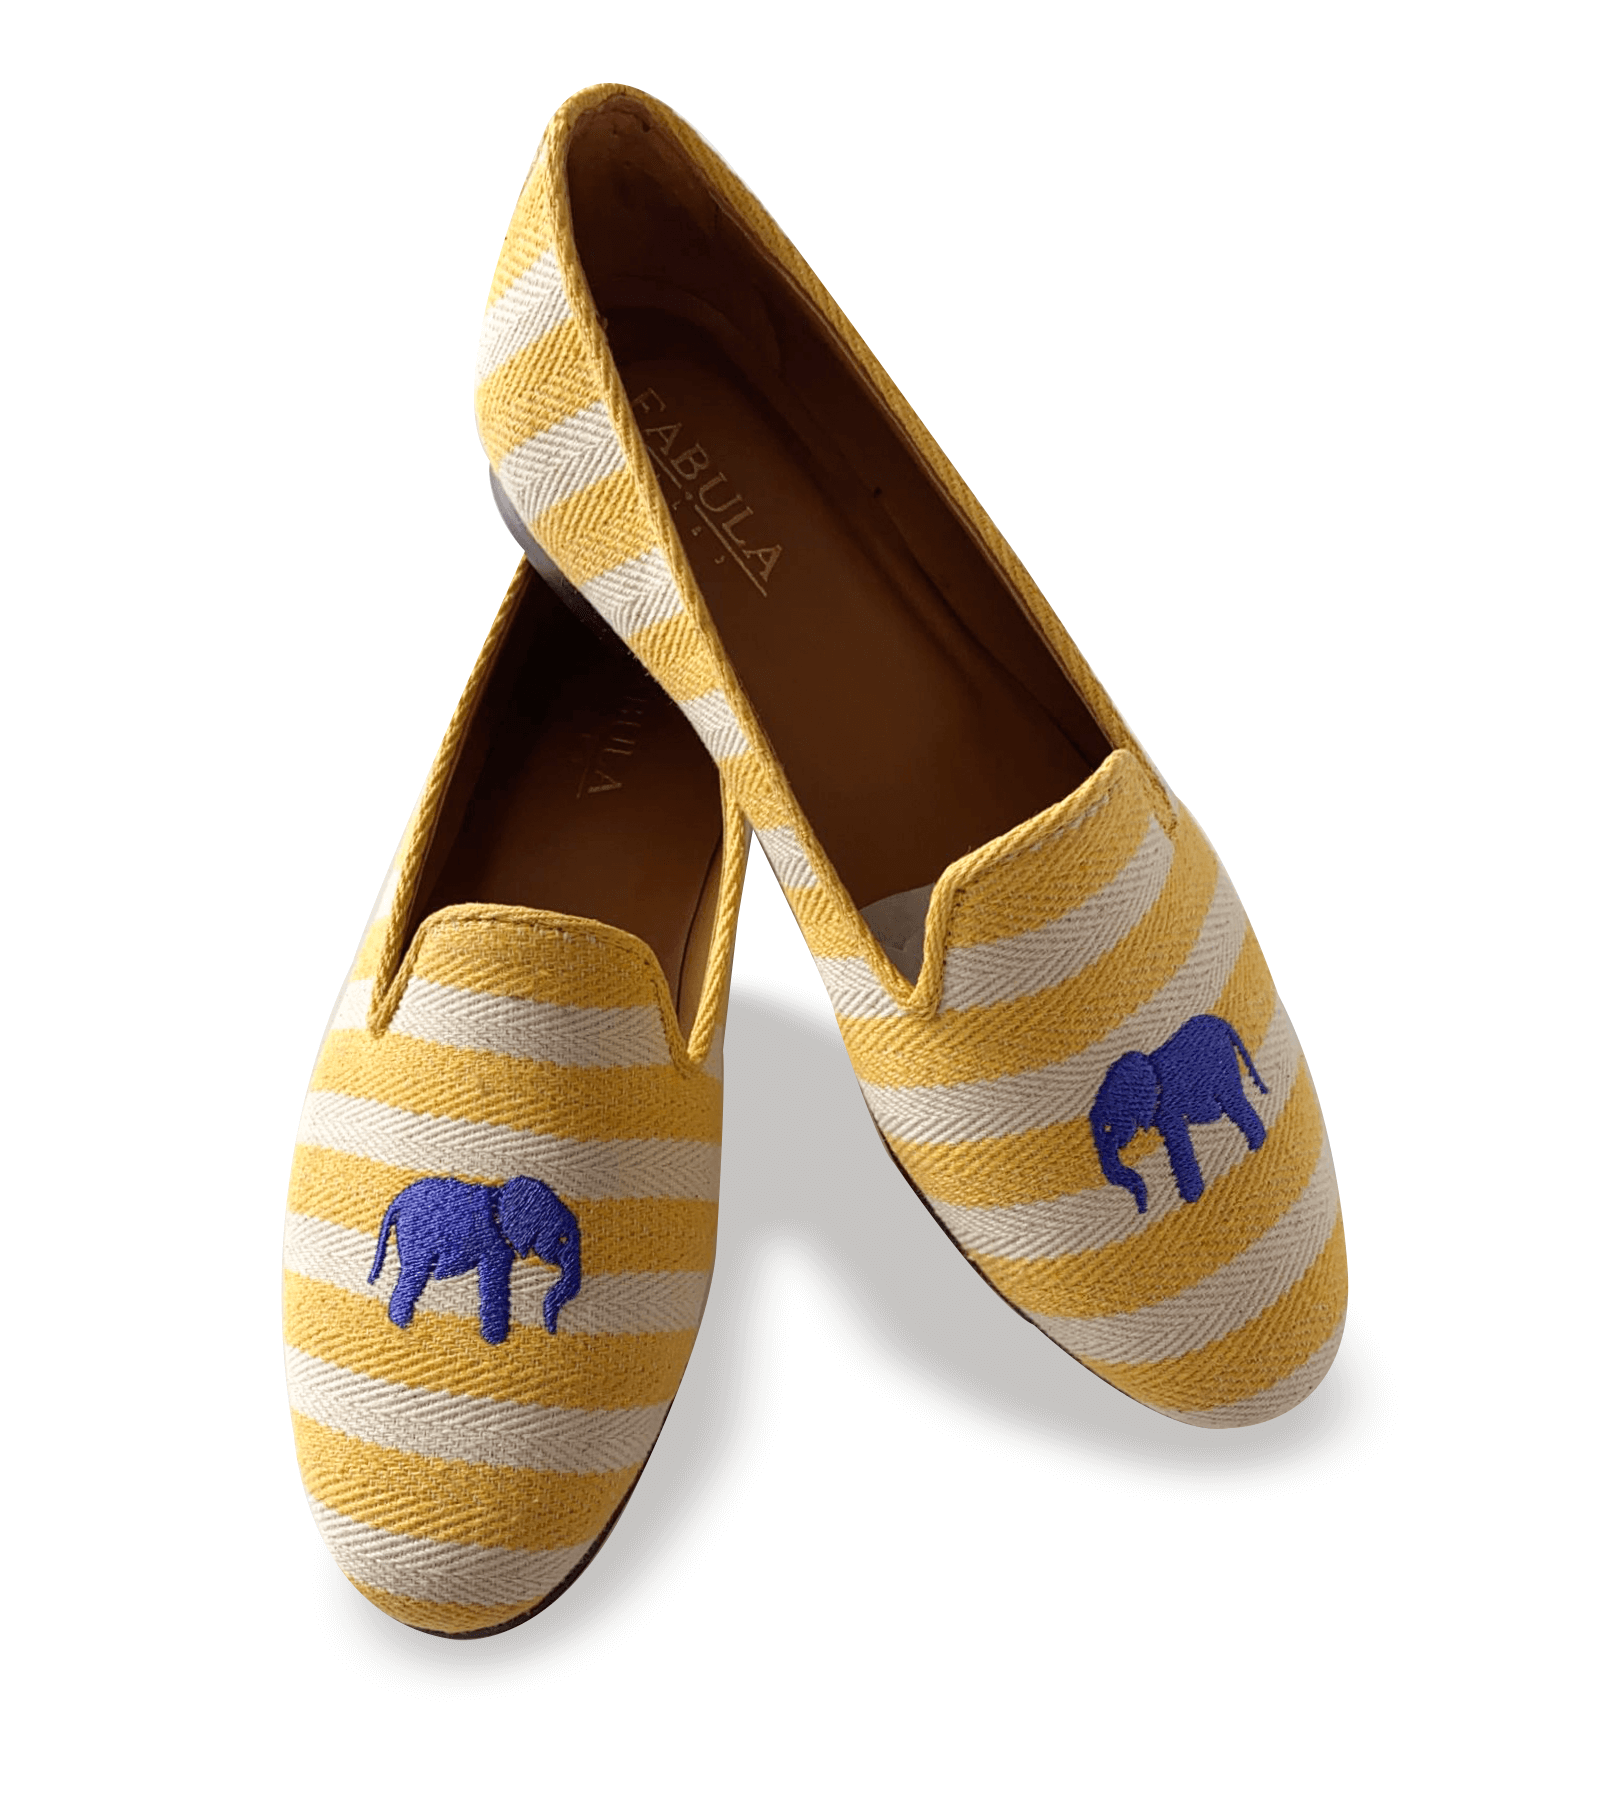 Luxury yellow and beige striped linen slippers with yellow grosgrain trimming, blue elephant embroidery on top and nubuck leather sole.